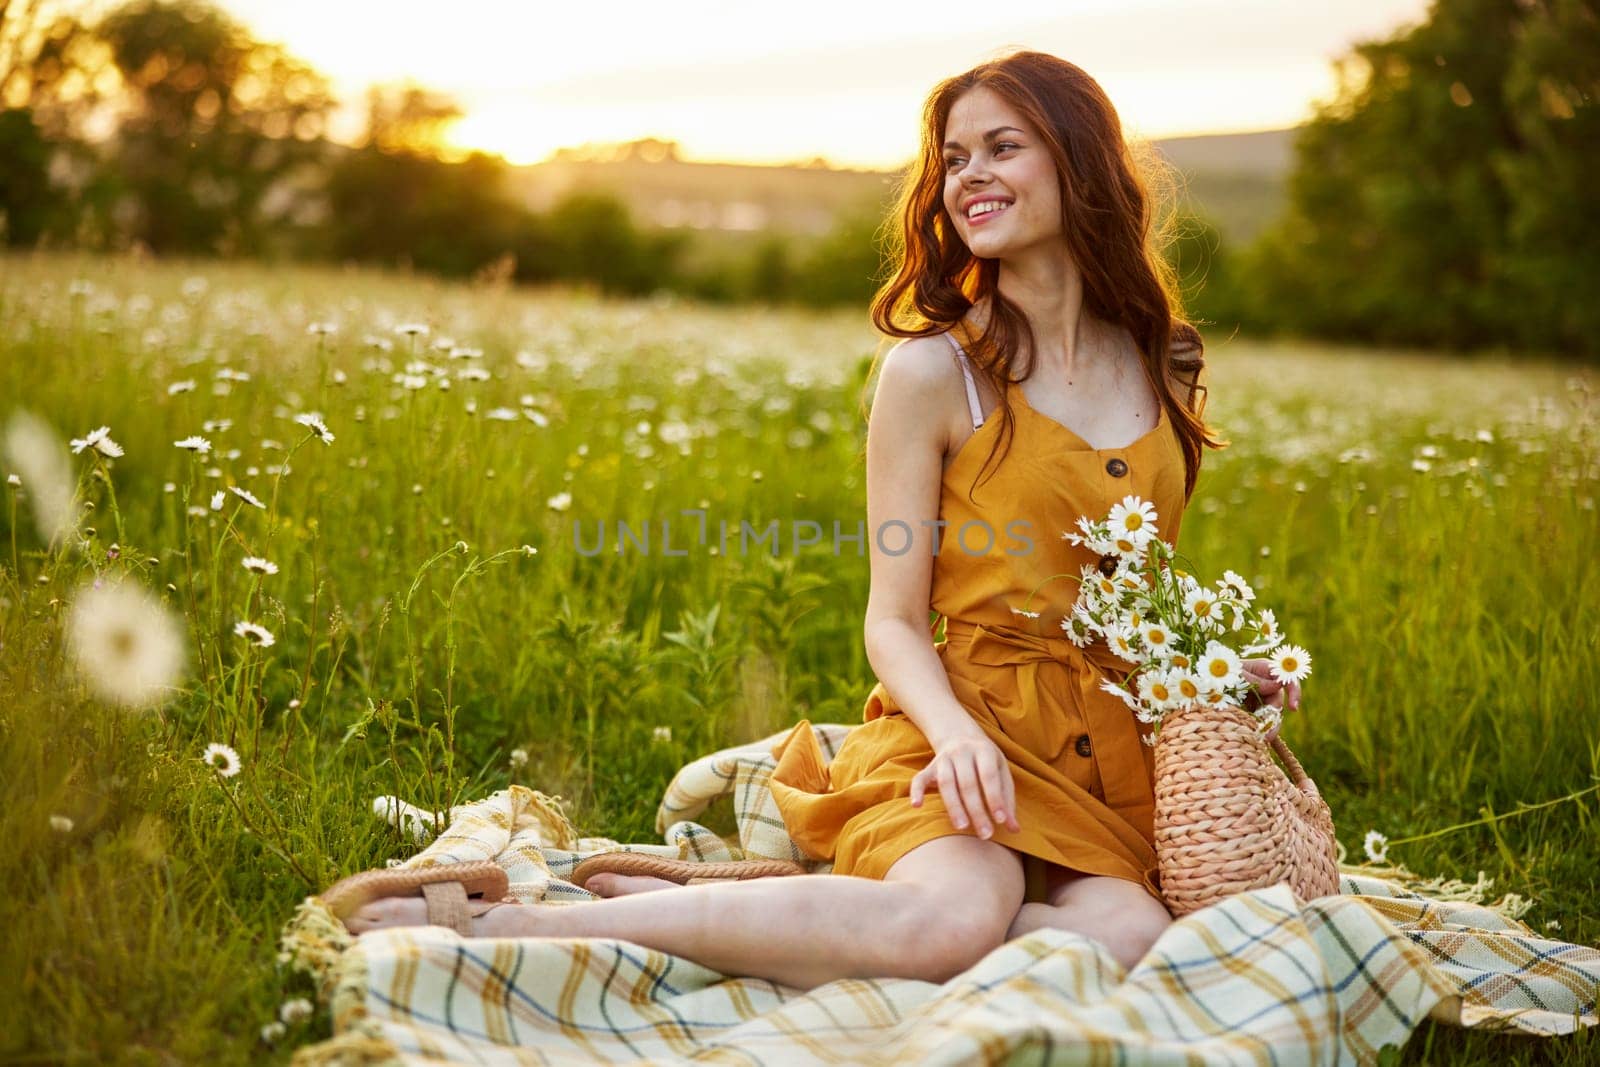 beautiful woman, in a summer orange dress enjoys nature while sitting in a chamomile field by Vichizh